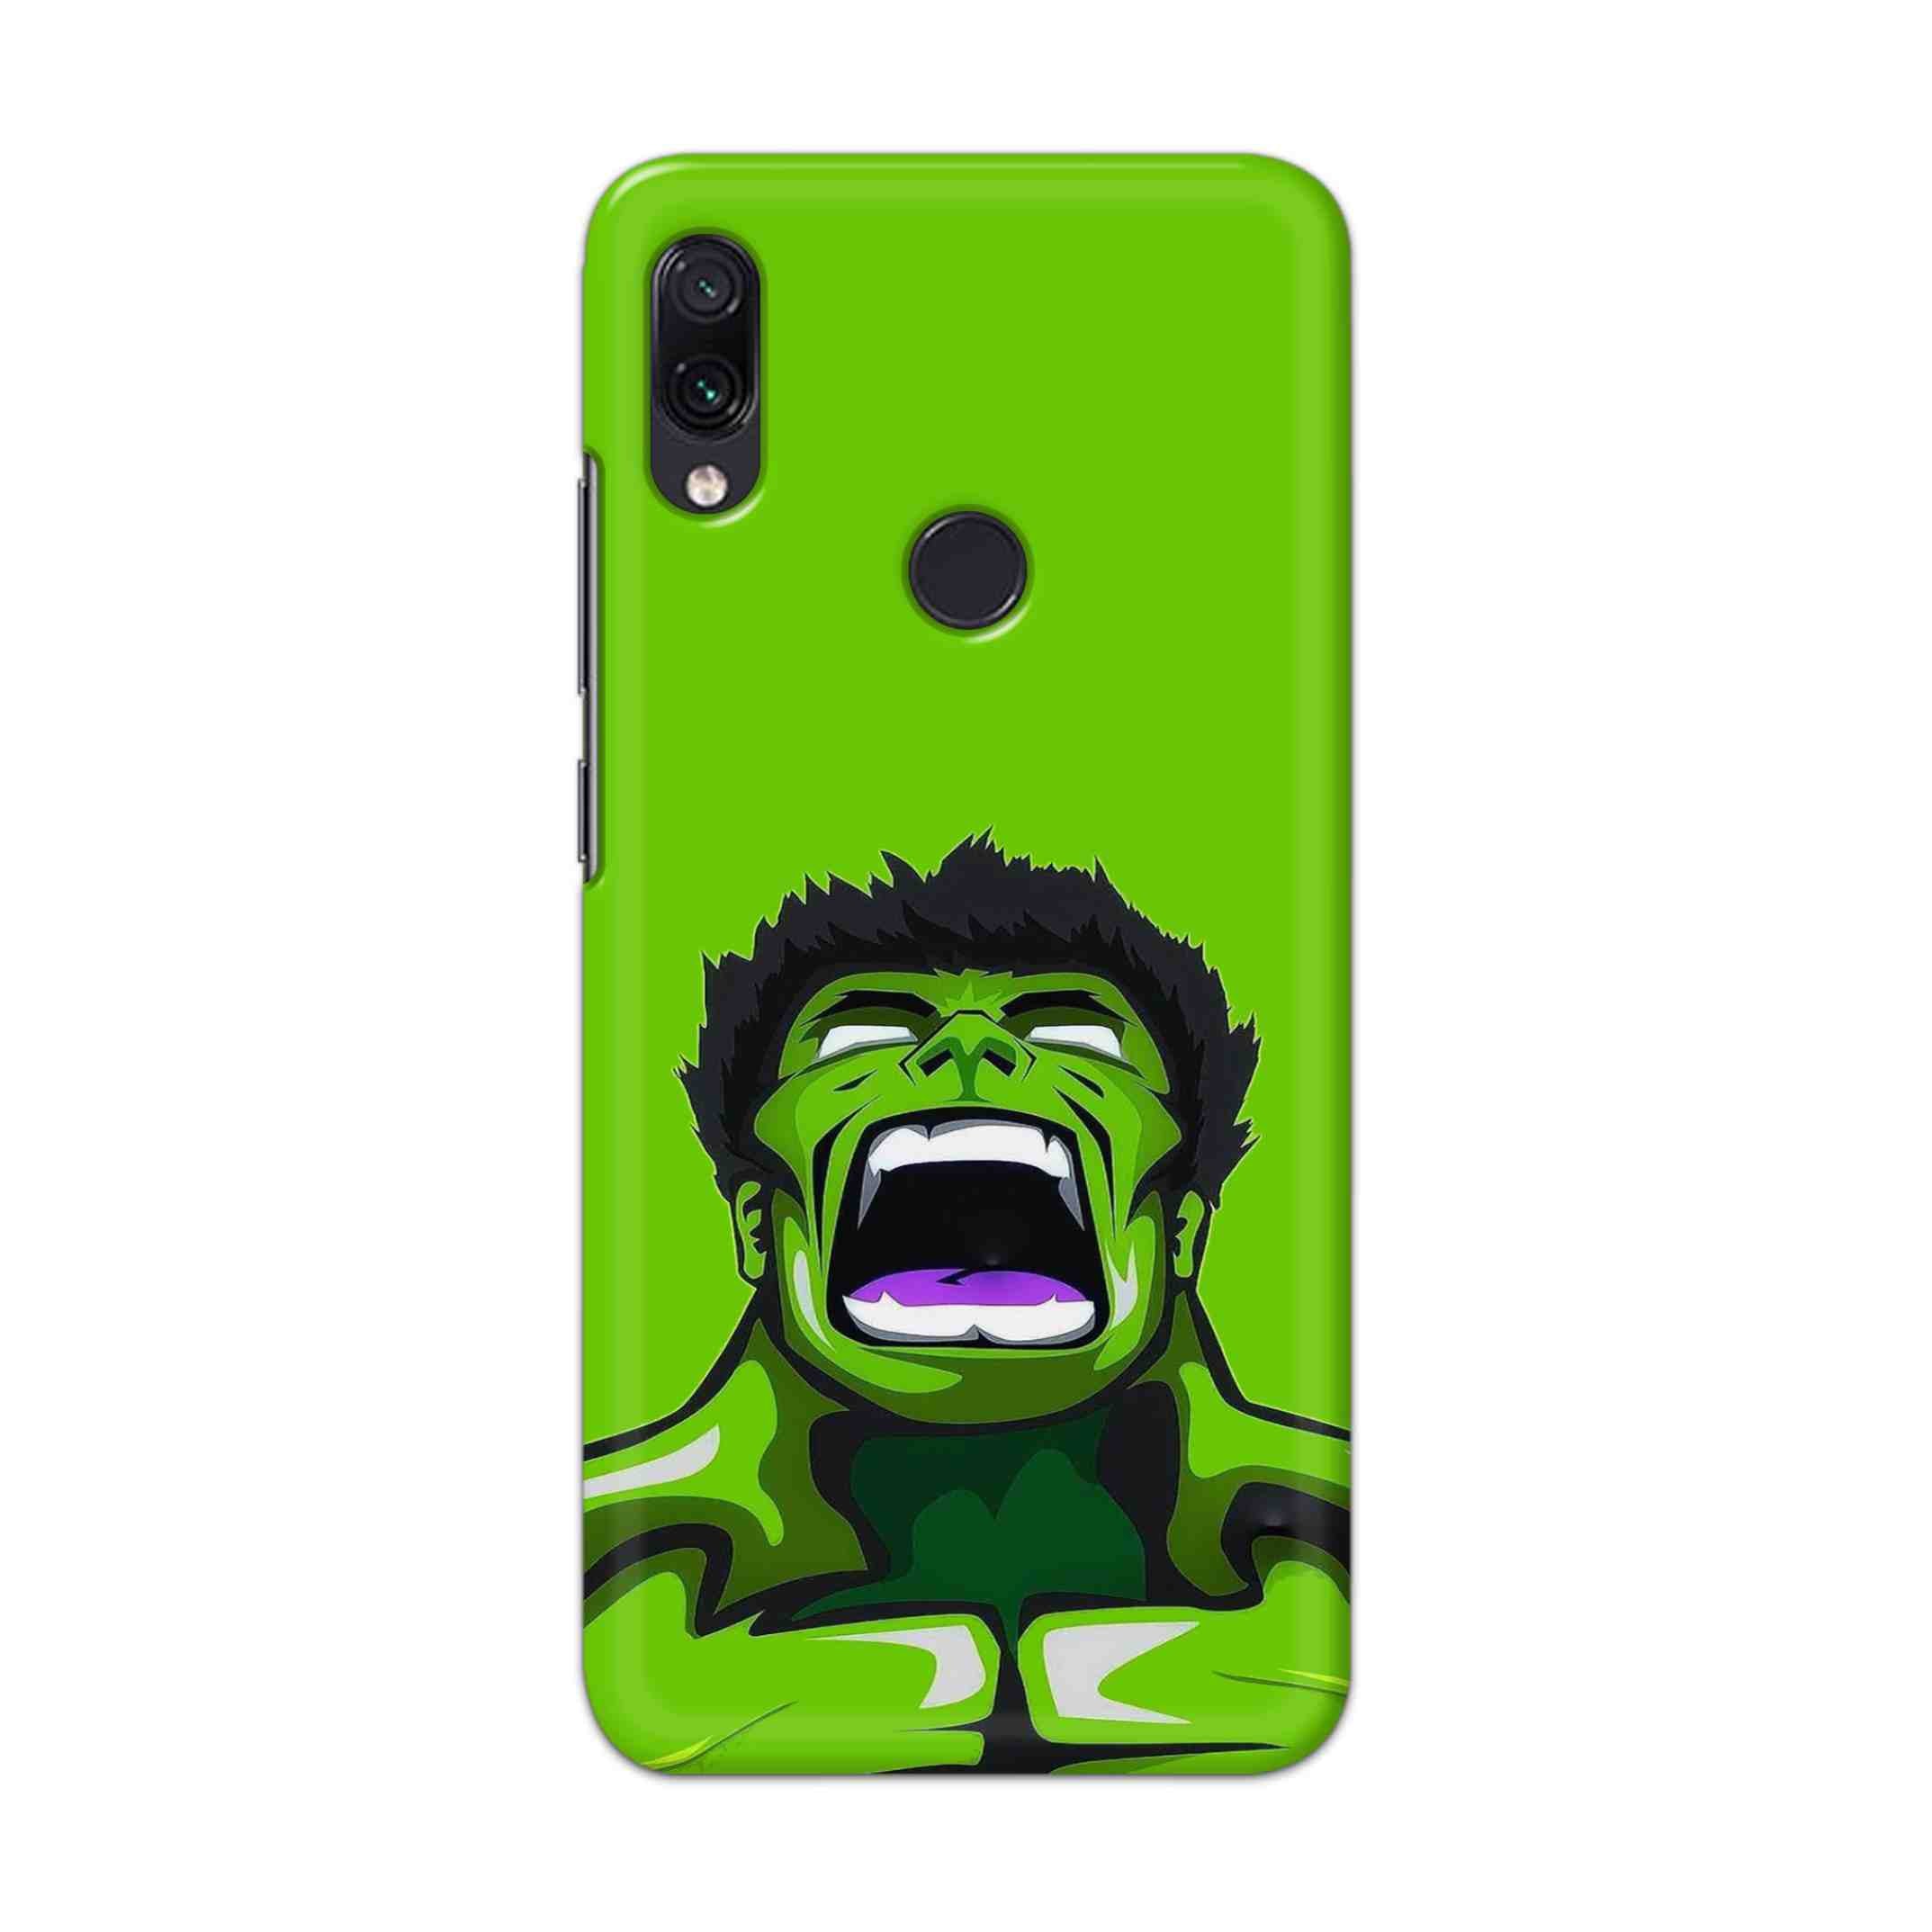 Buy Green Hulk Hard Back Mobile Phone Case Cover For Redmi Note 7 / Note 7 Pro Online